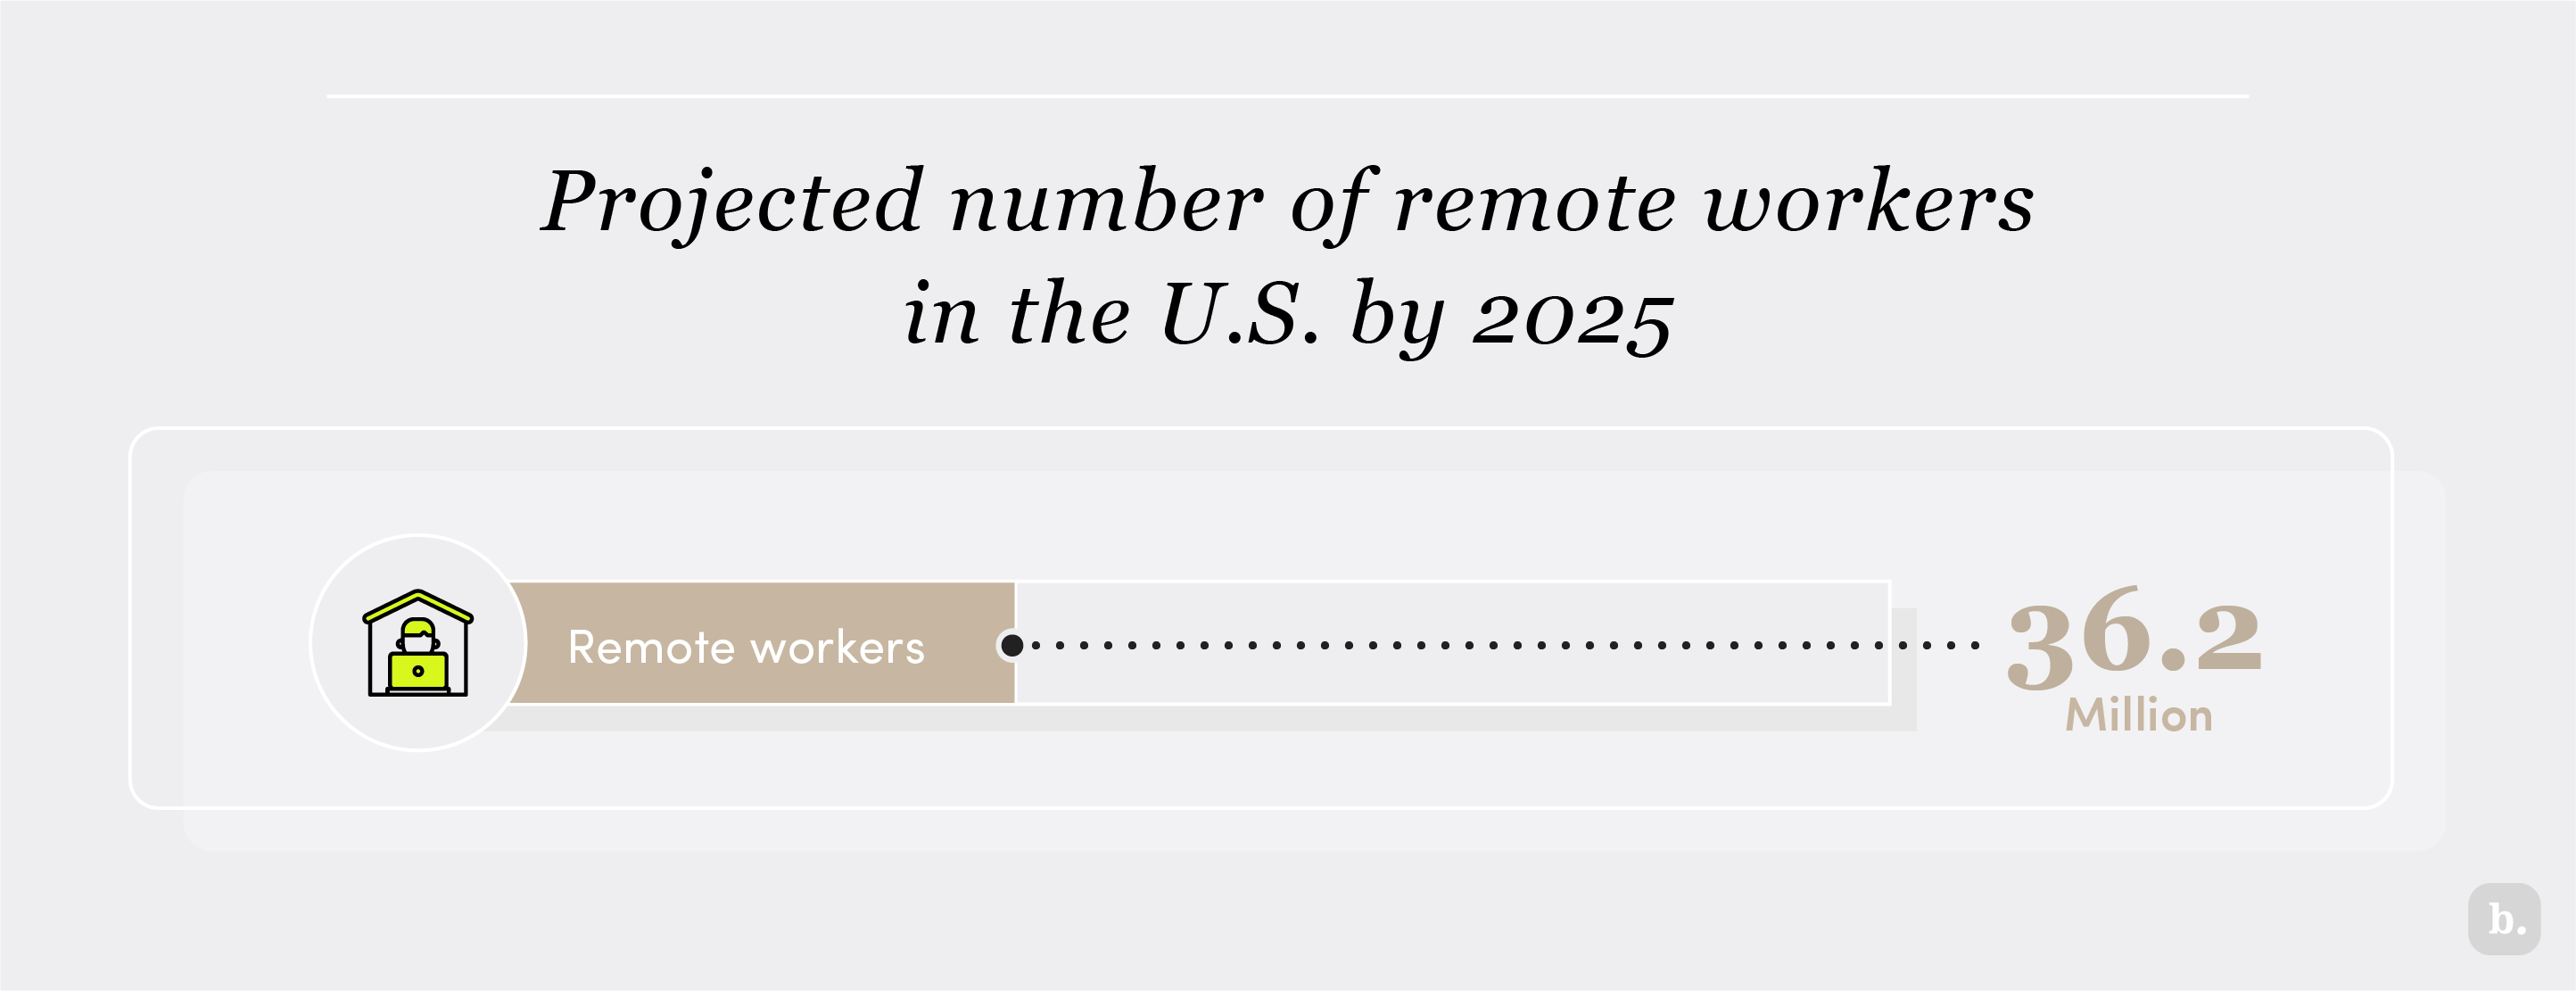 Projected number of remote workers in the U.S. by 2025 graphic